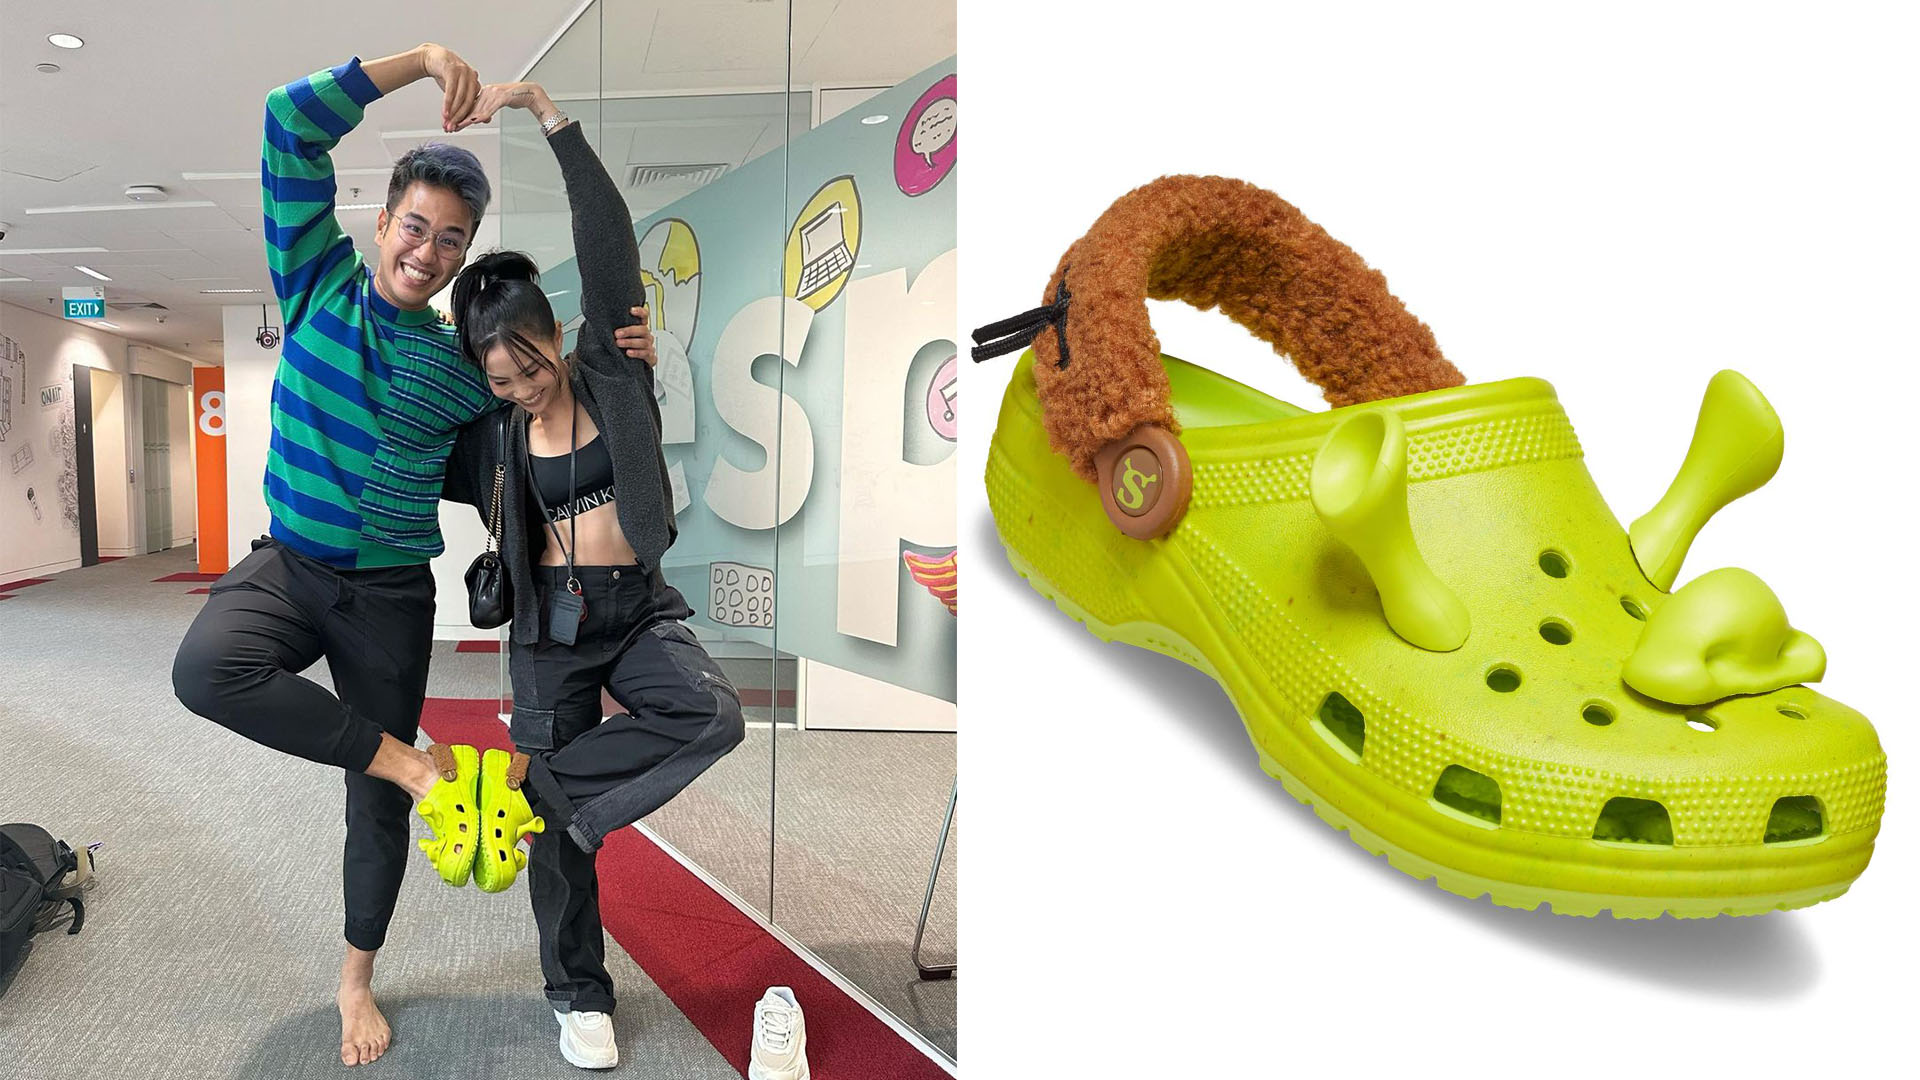 Shrek x Crocs - a collab you didn't know you needed. For just $8